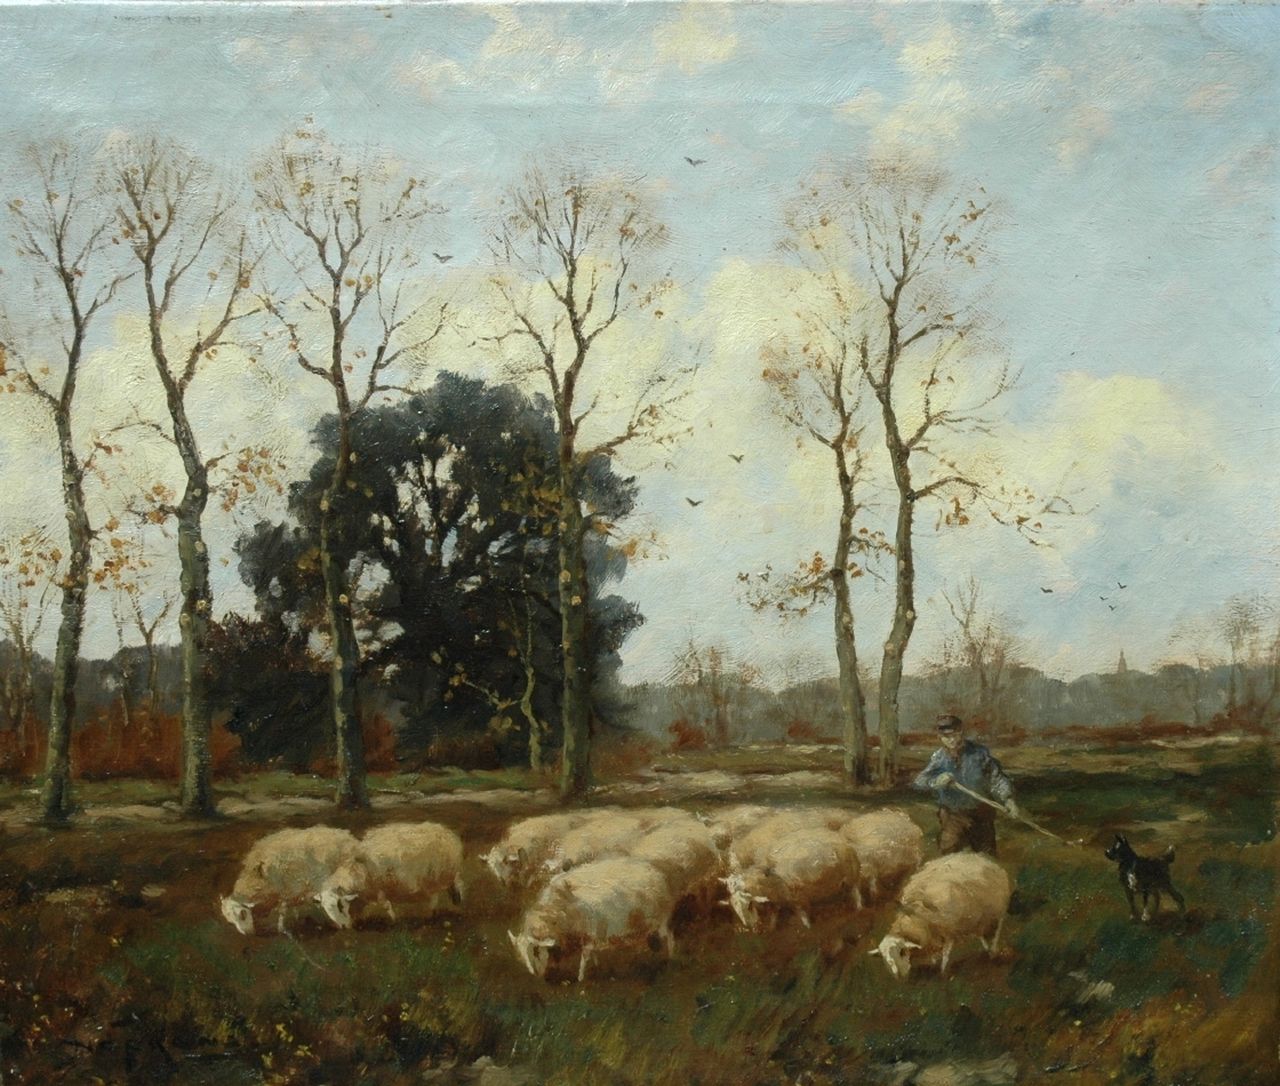 Nefkens M.J.  | Martinus Jacobus Nefkens, Shepherd with his dog and sheep, oil on canvas 50.0 x 61.0 cm, signed l.l.